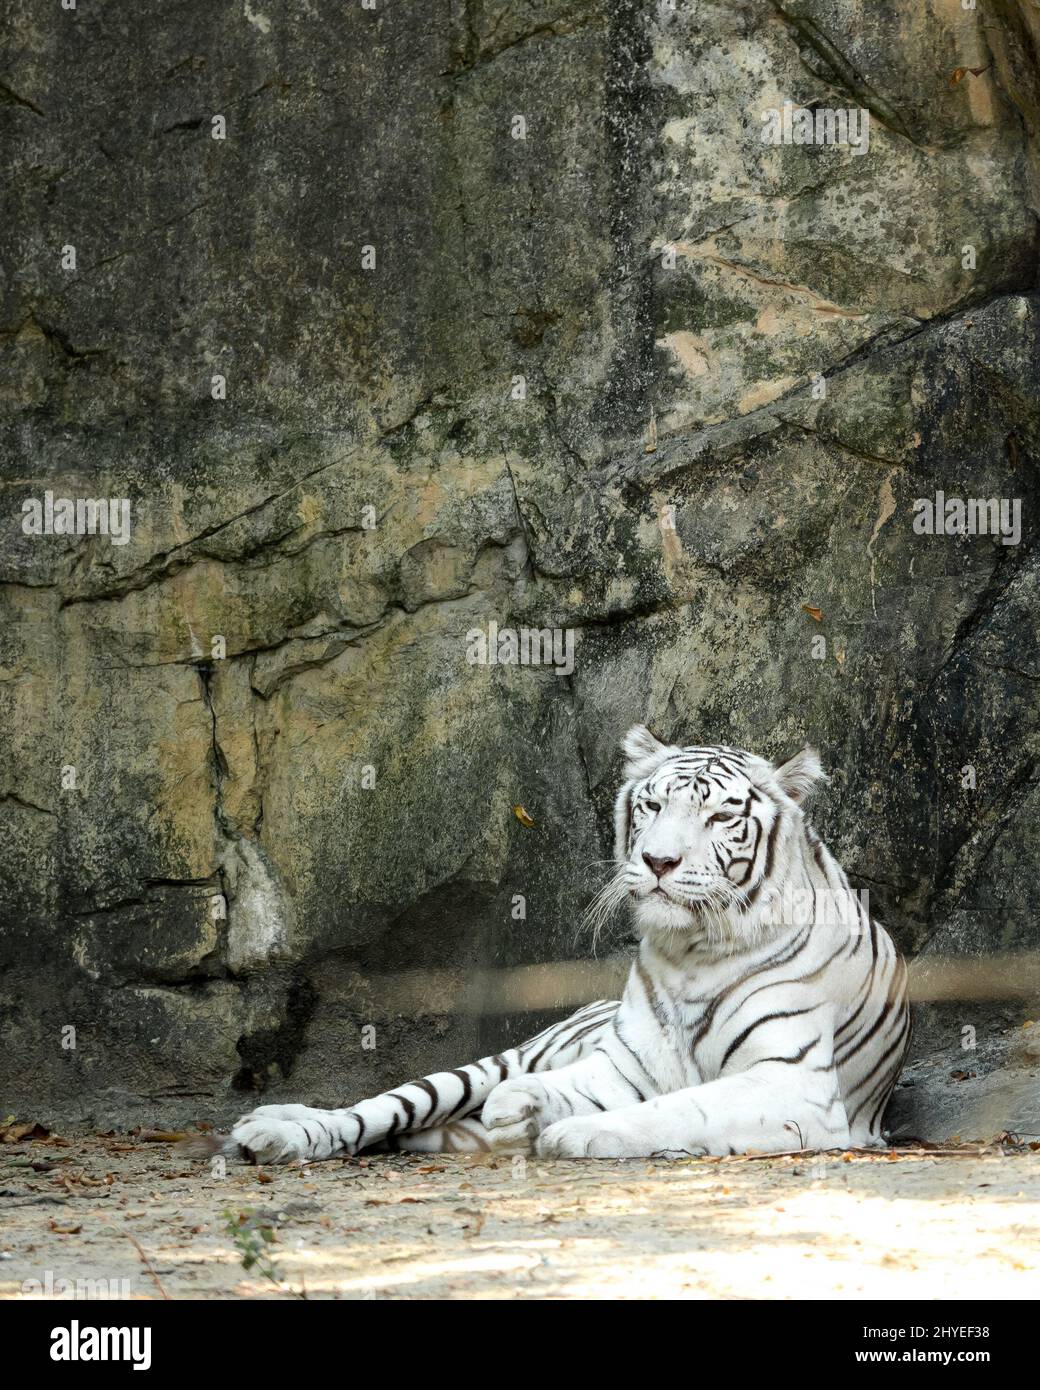 A beautiful white tiger lying down on the ground Stock Photo